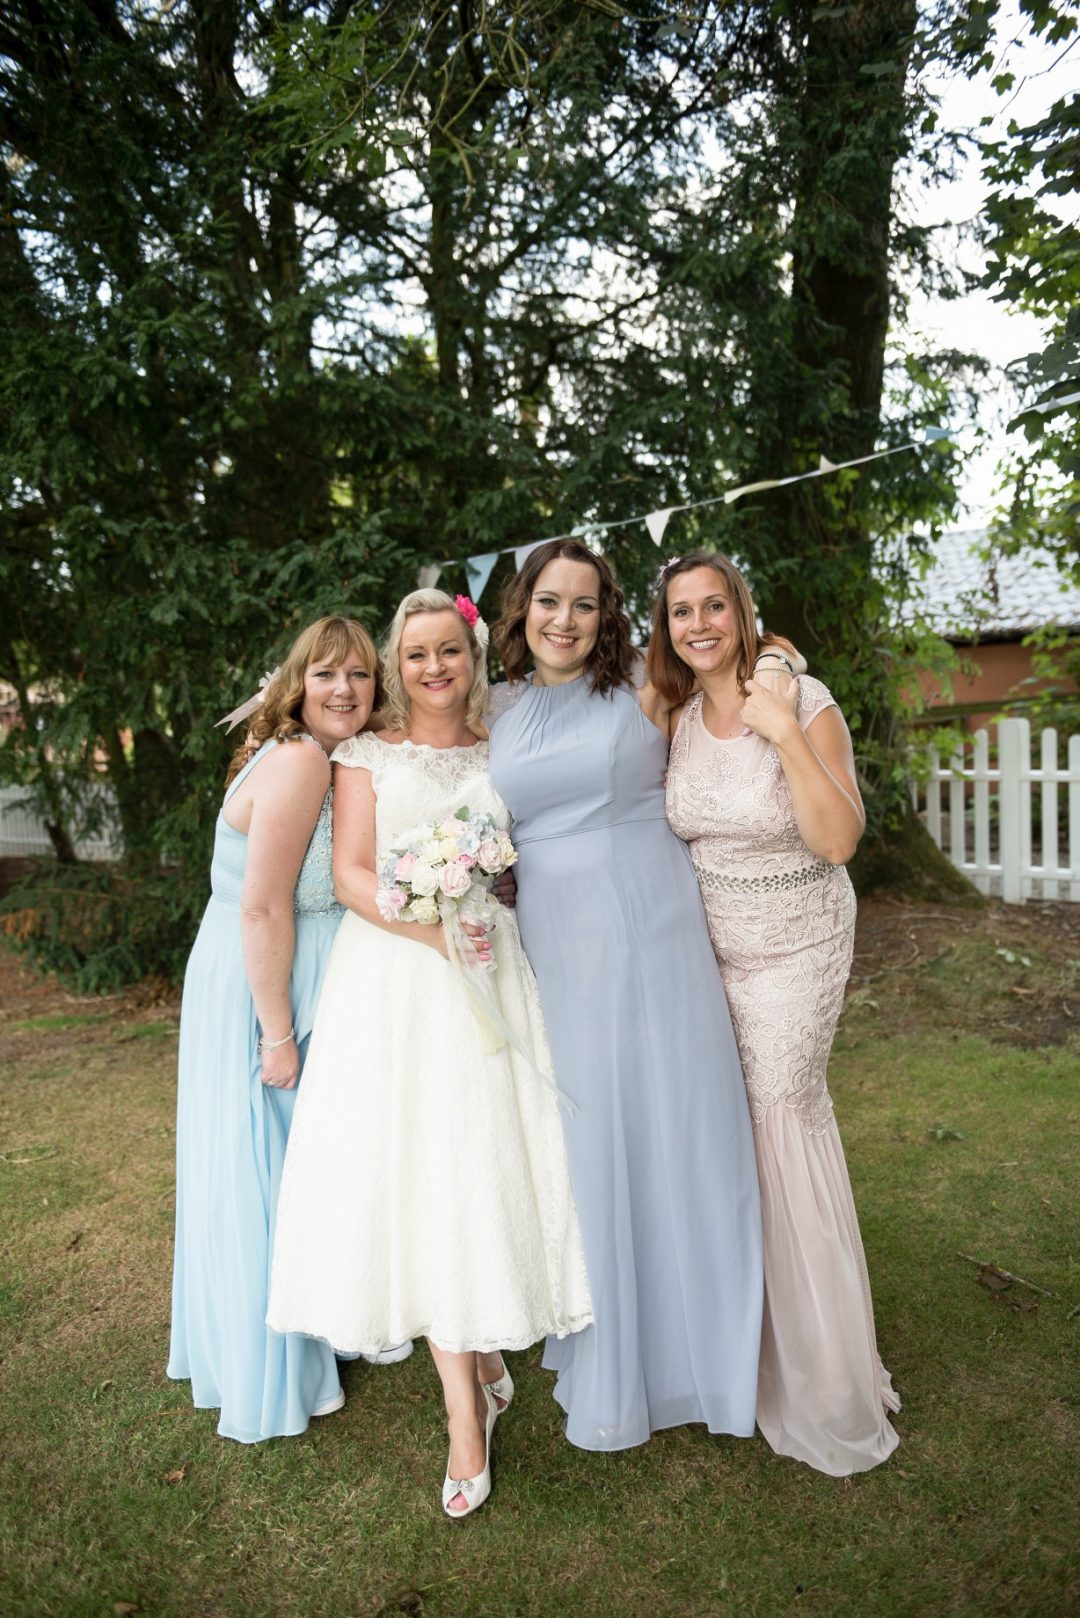 Wedding photography - rustic themed wedding at Hayne House in Saltwood, Kent - bride and bridesmaids